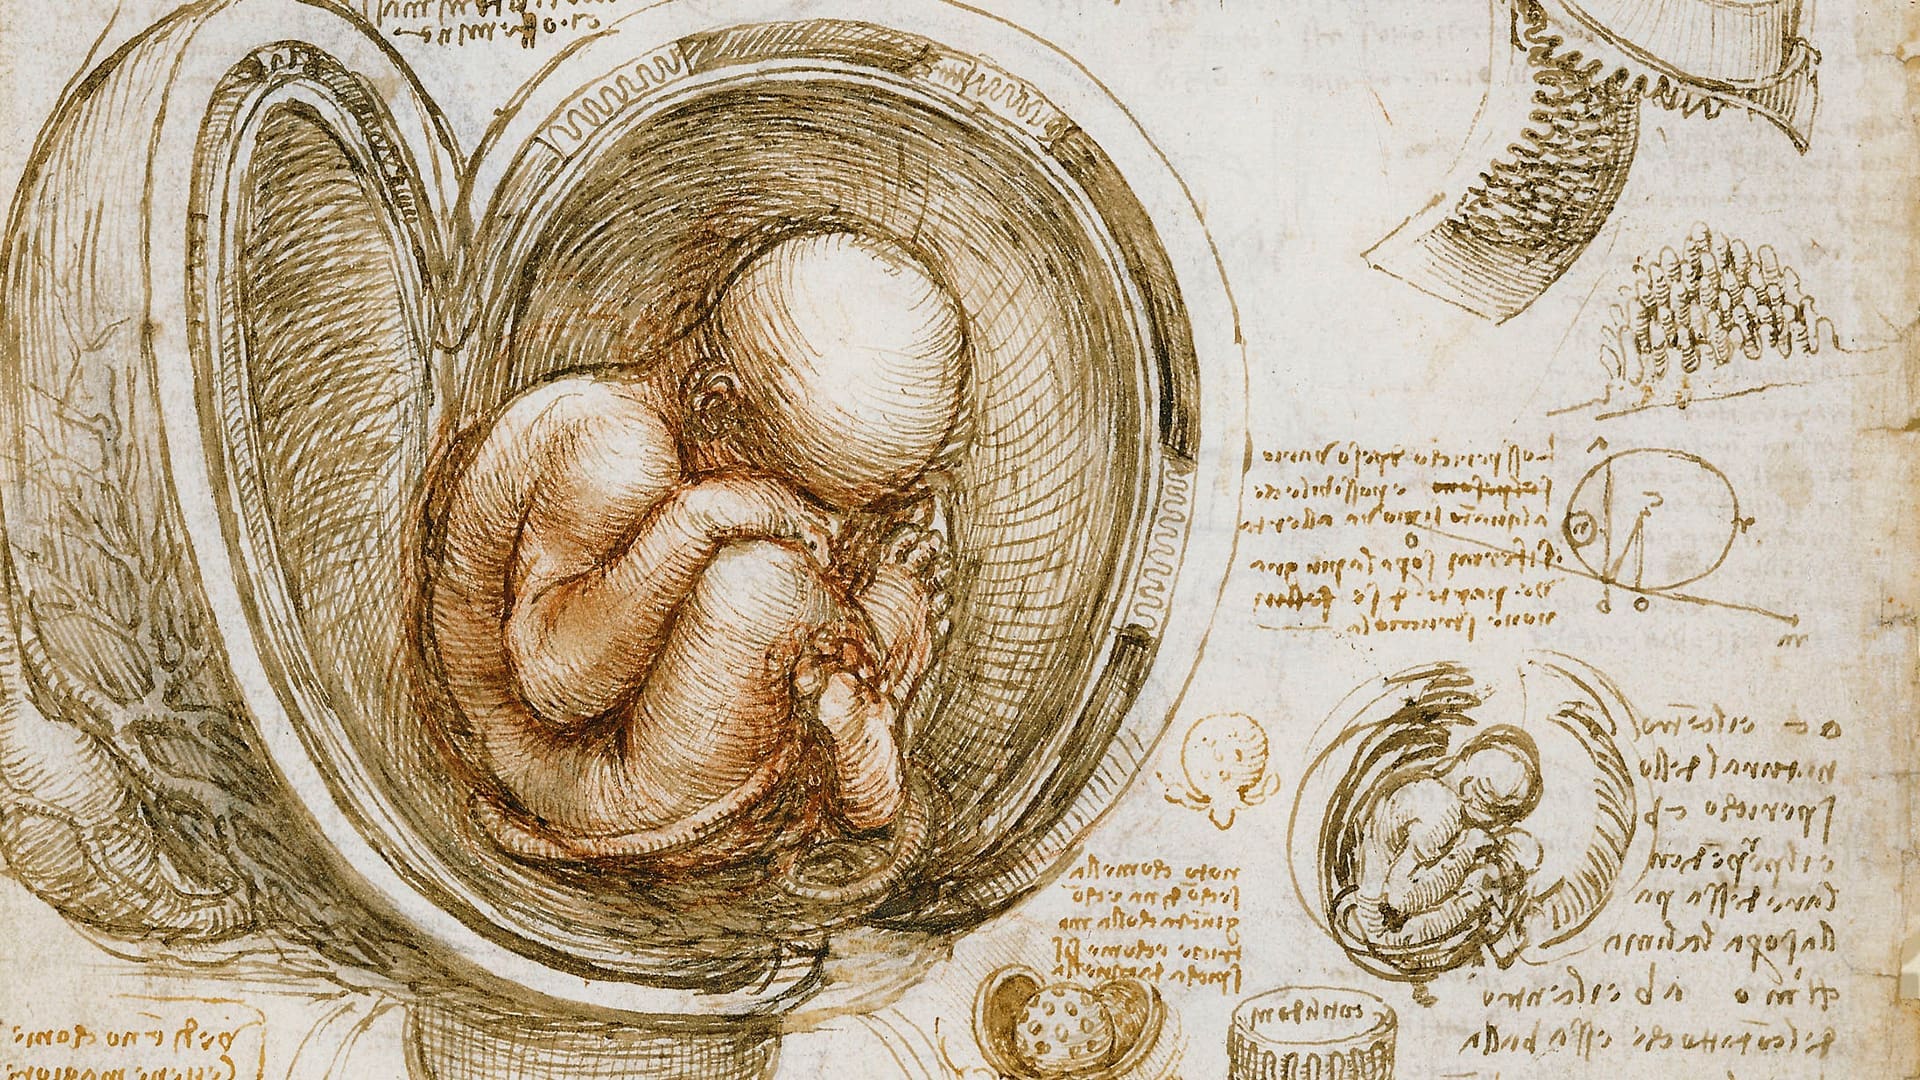 Studies of the Foetus in the Womb